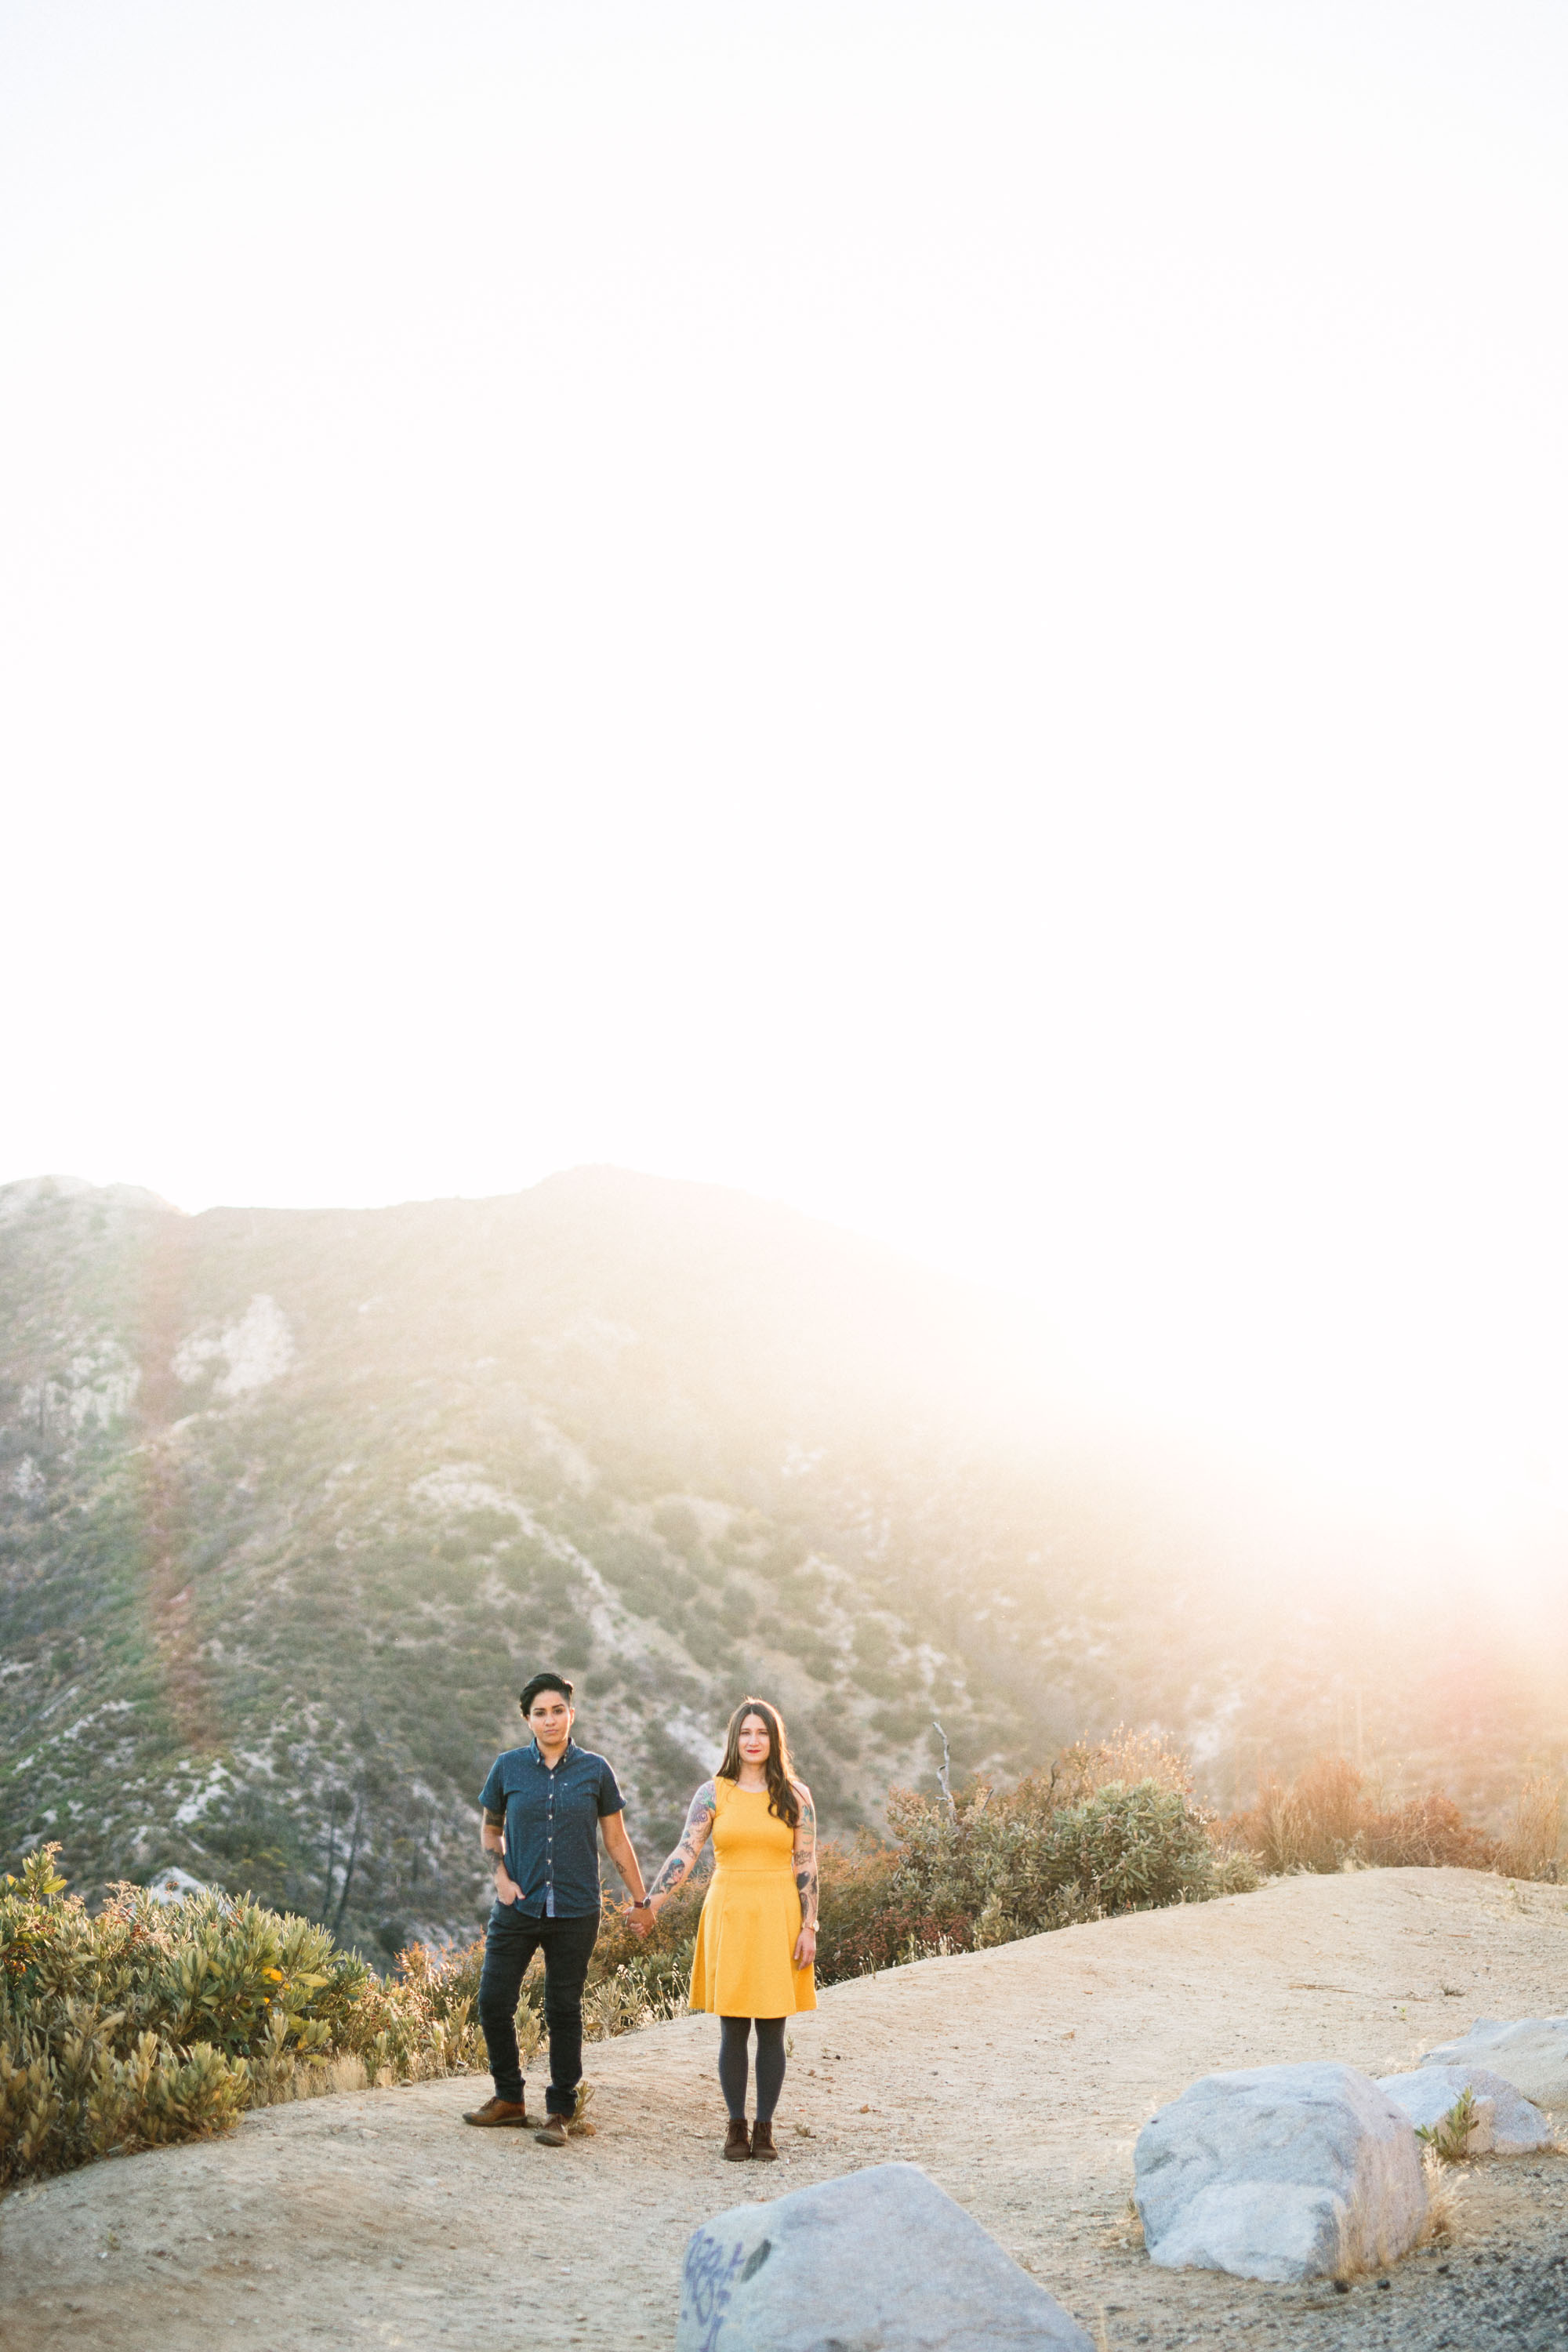 www-marycostaphotography-com-angeles-national-forest-engagement-0027